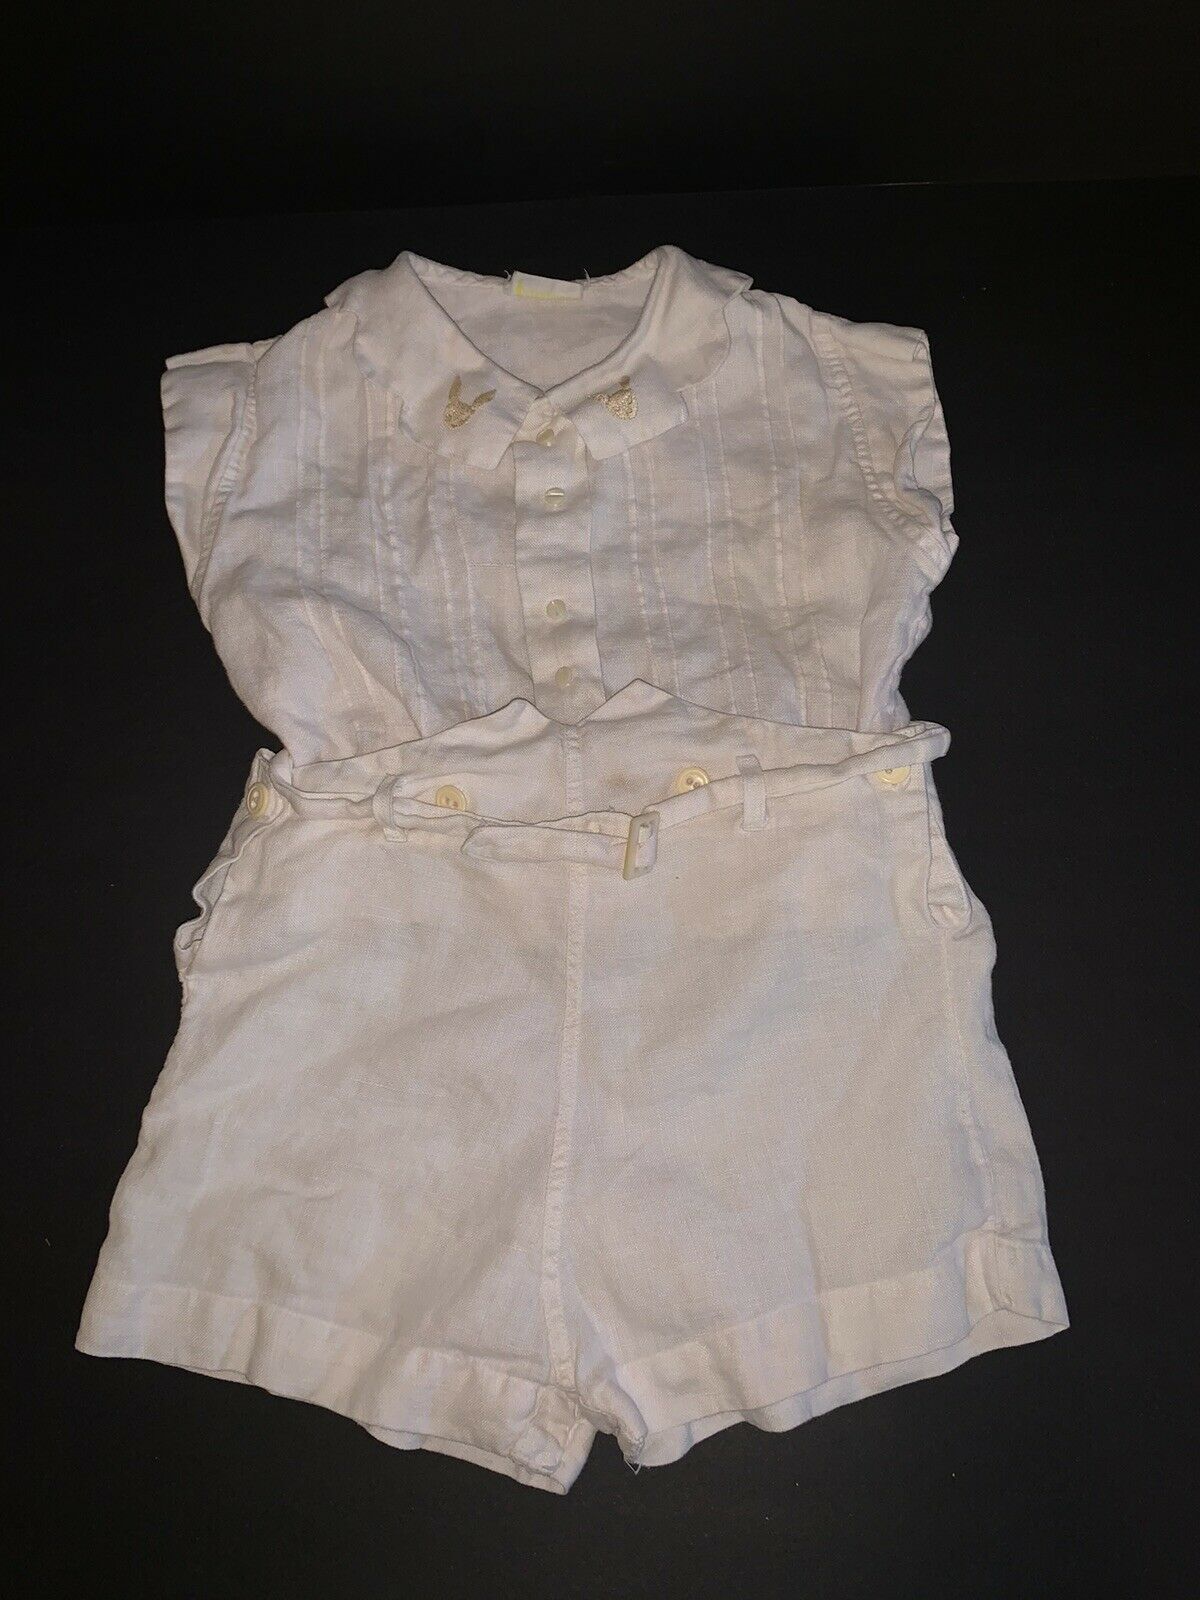 Vintage Baby Outfit Stantogs White Shorts Shirt Button Together Bunny Collar